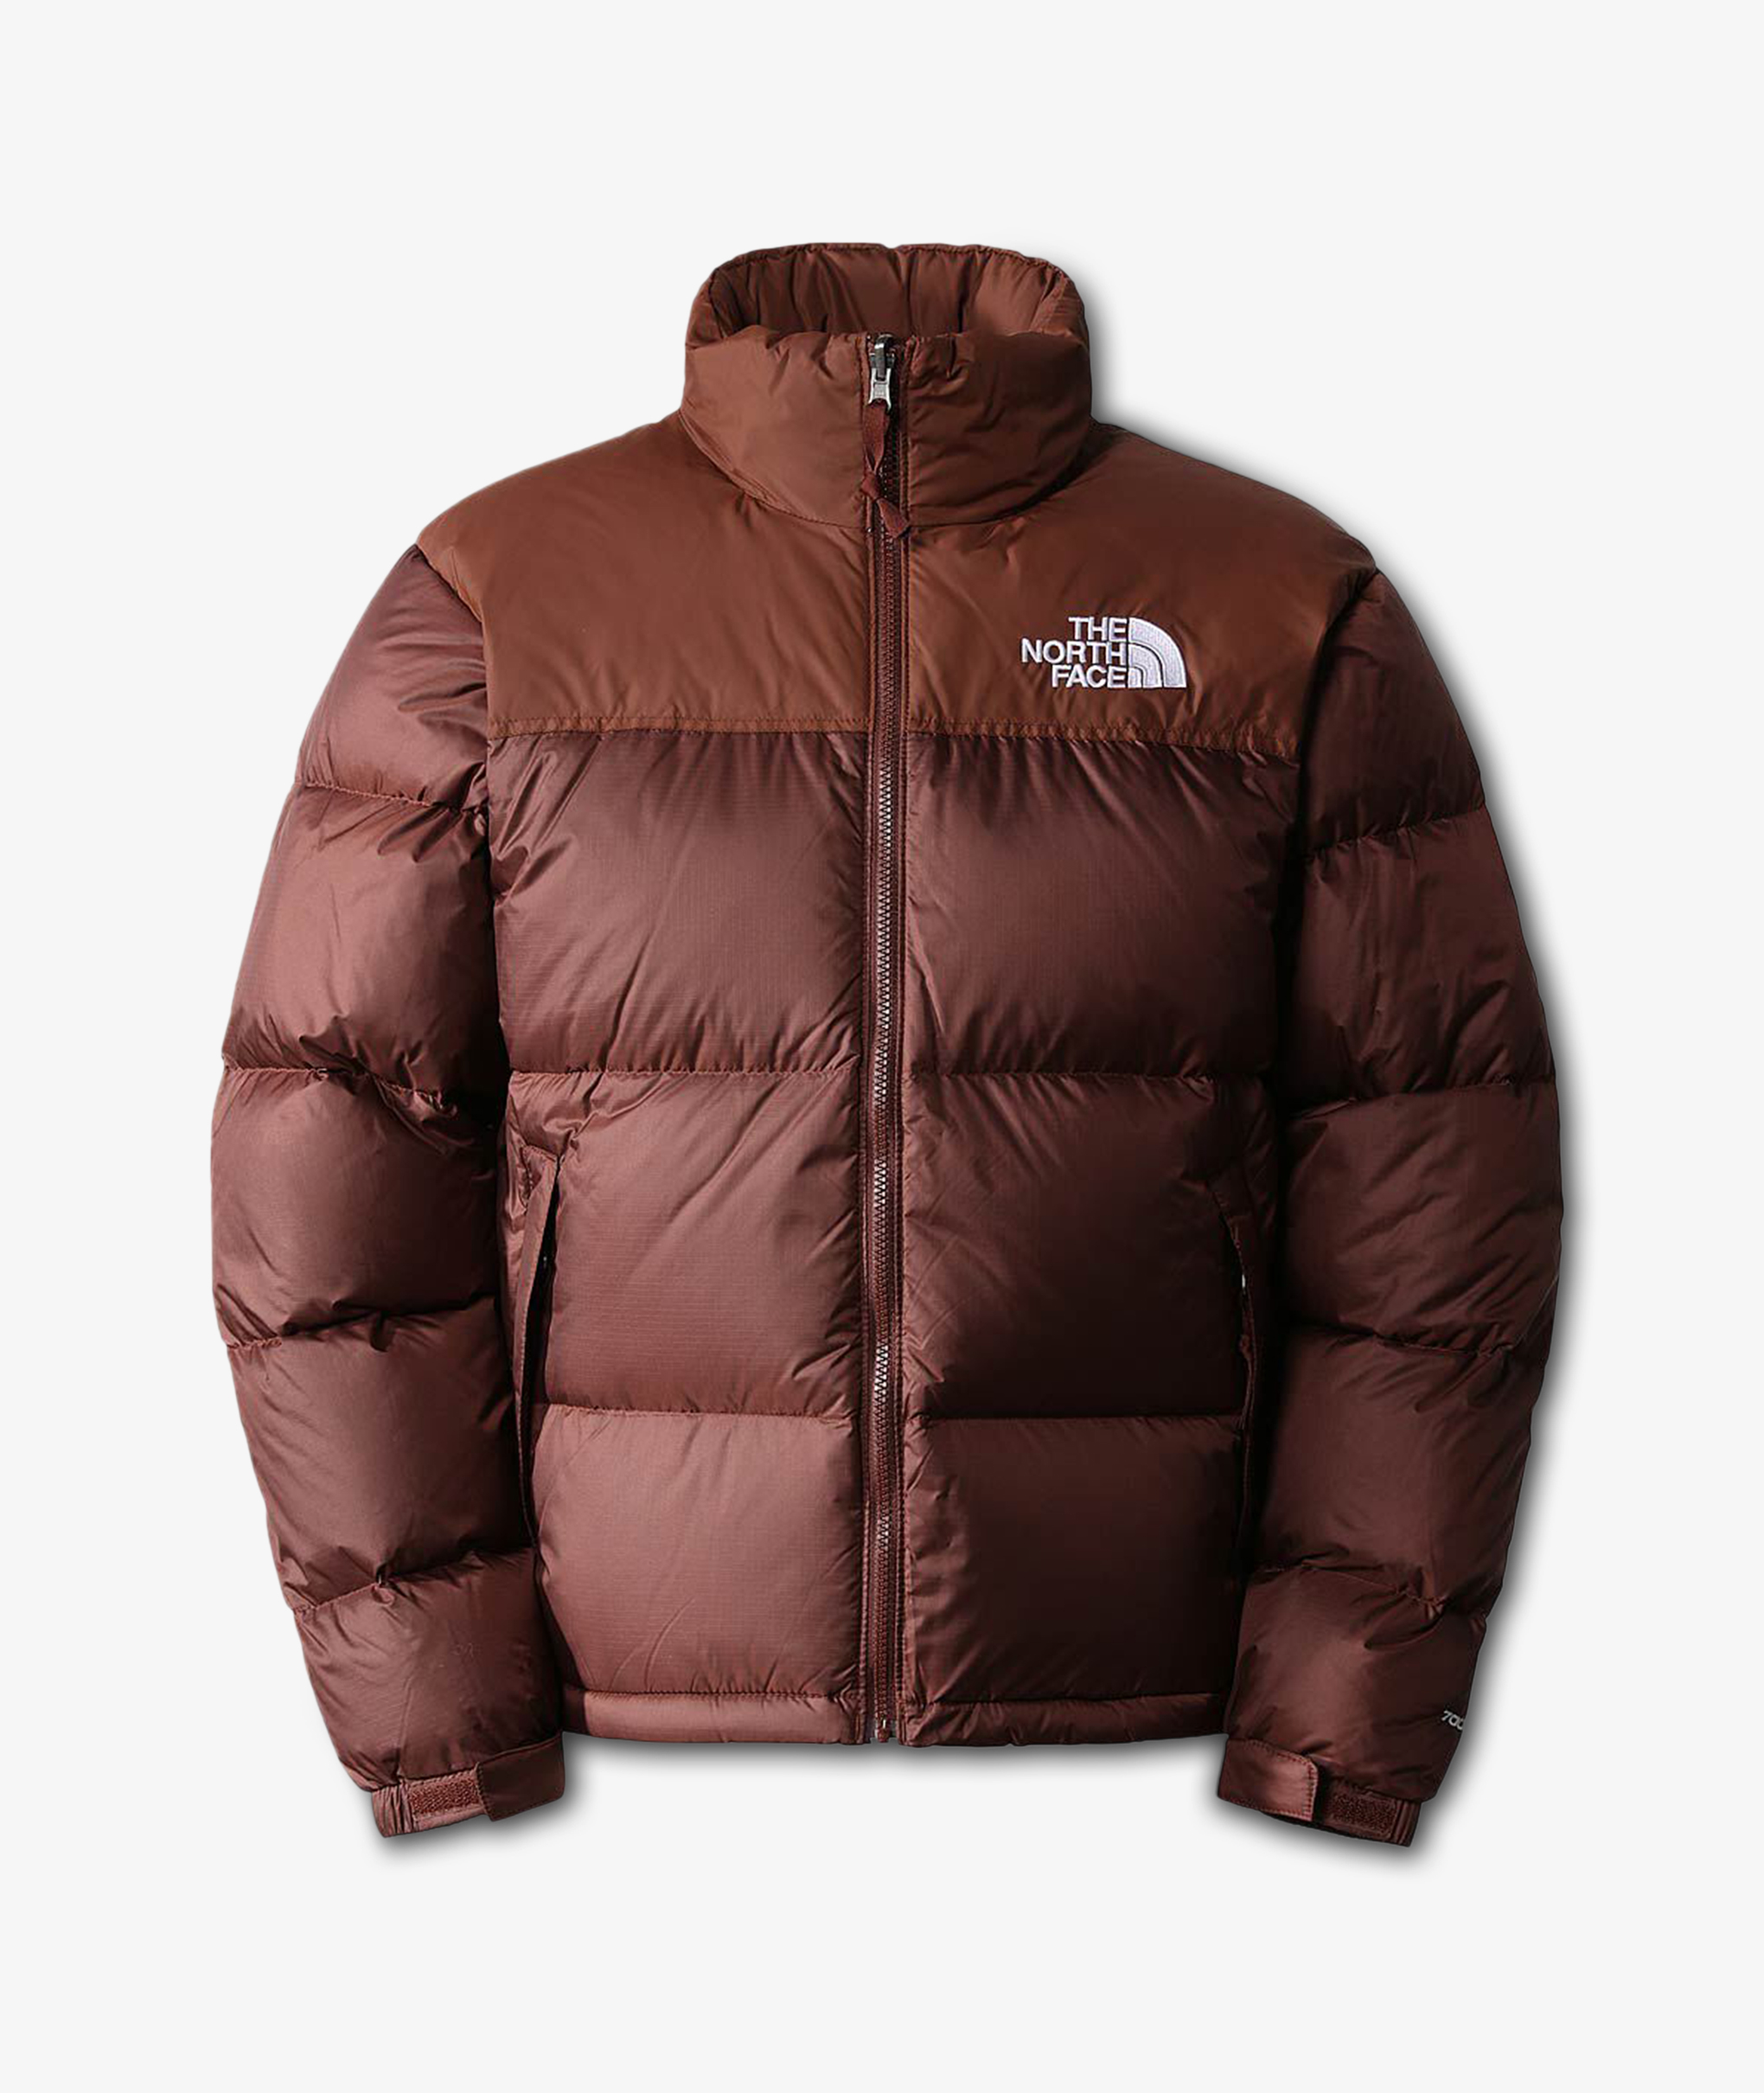 Norse Store | Shipping Worldwide - The North Face 1996 Retro